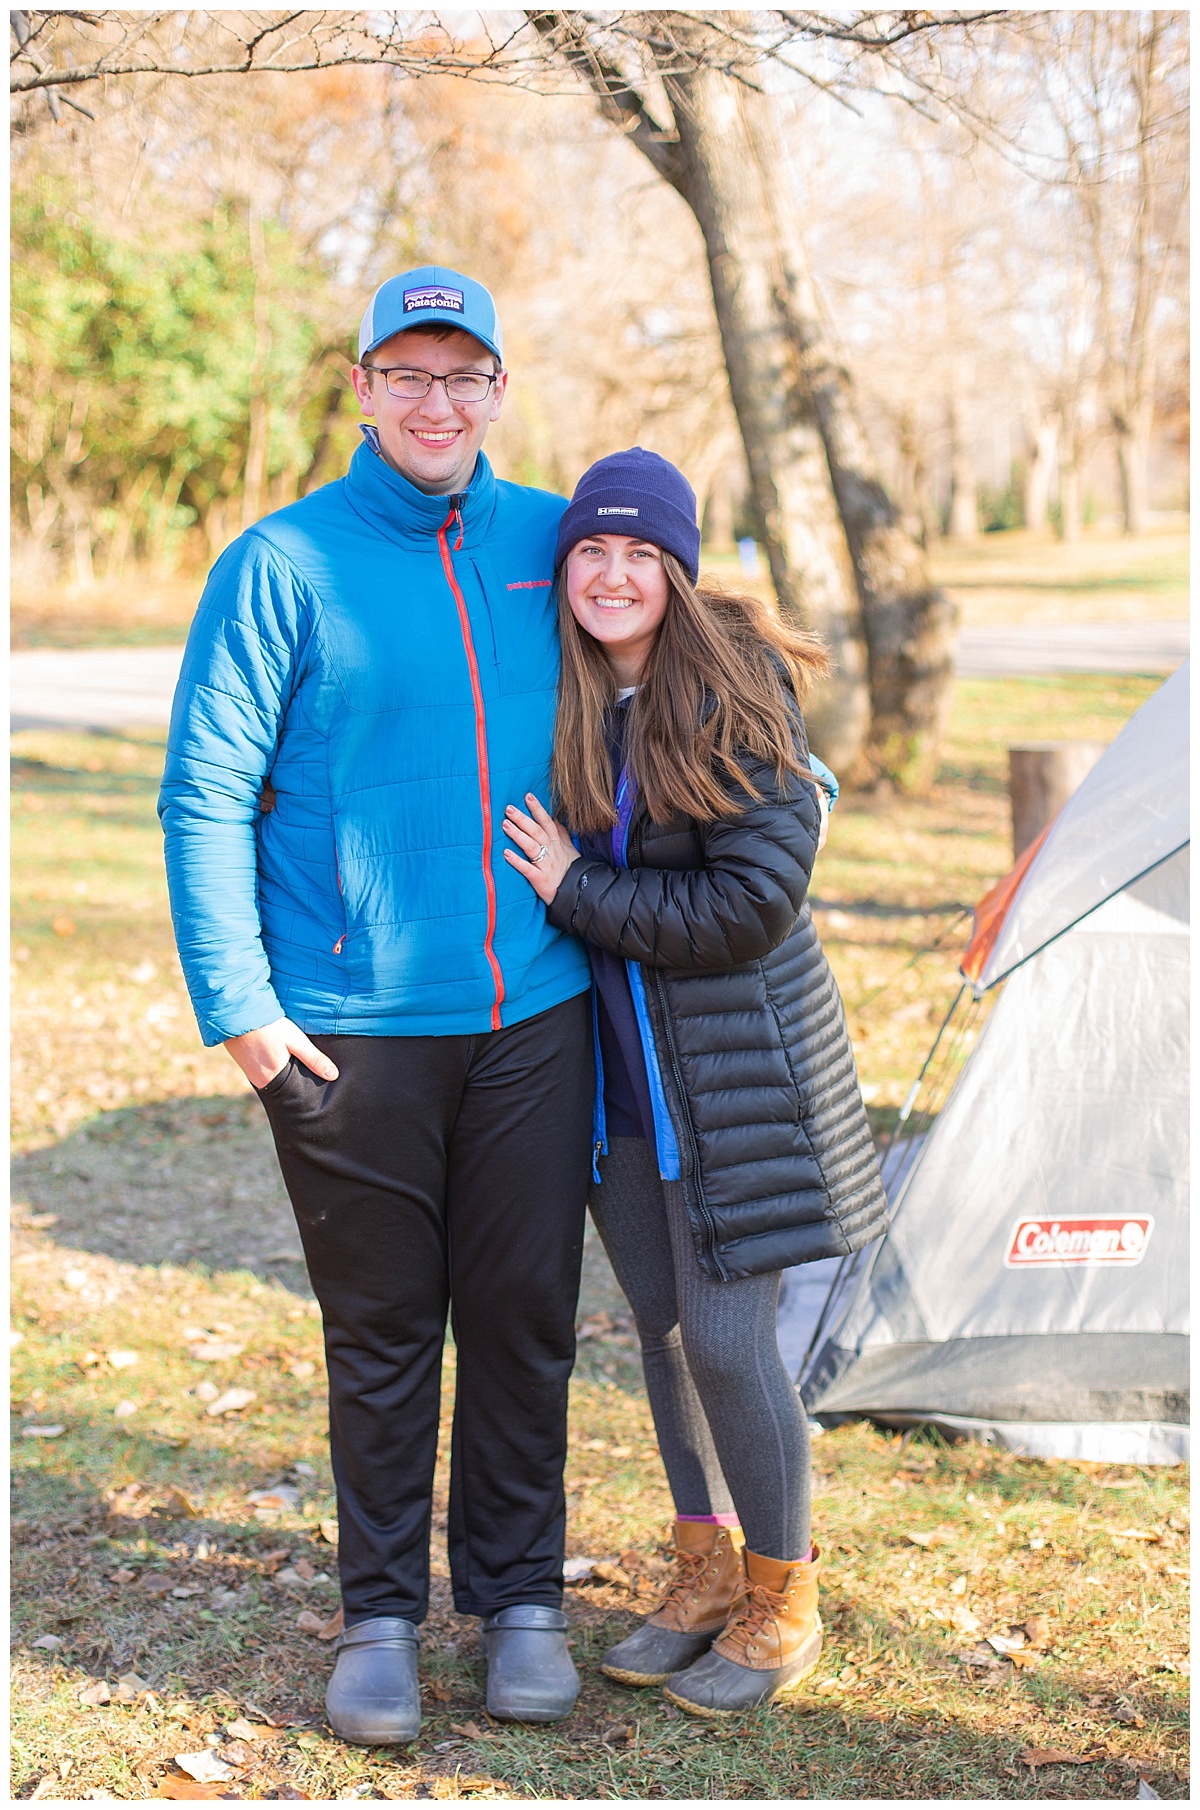 Winter Camping | Monica Brown Photography | monicabrownphoto.com